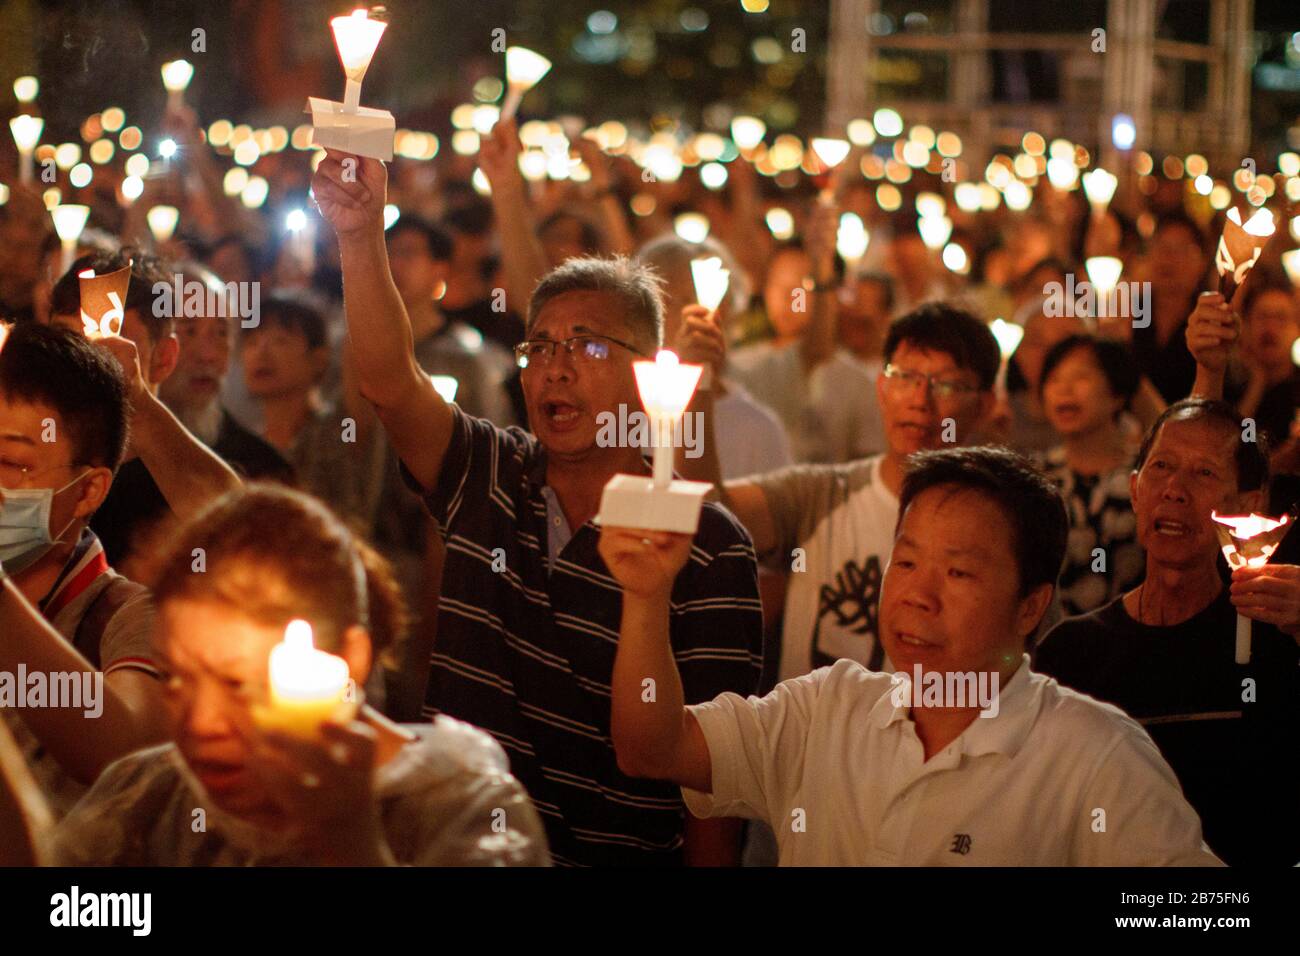 Thousands of people gather in Victoria Park to commemorate the 4 June 1989 massacre in Hong Kong, China, 04 June 2018. They also demand the end of the one-party rule in China and paid tribute to the deceased Chinese dissident and Nobel laureate Liu Xiaobo. Hong Kong is the only place on Chinese territory where such a vigil is allowed. Stock Photo